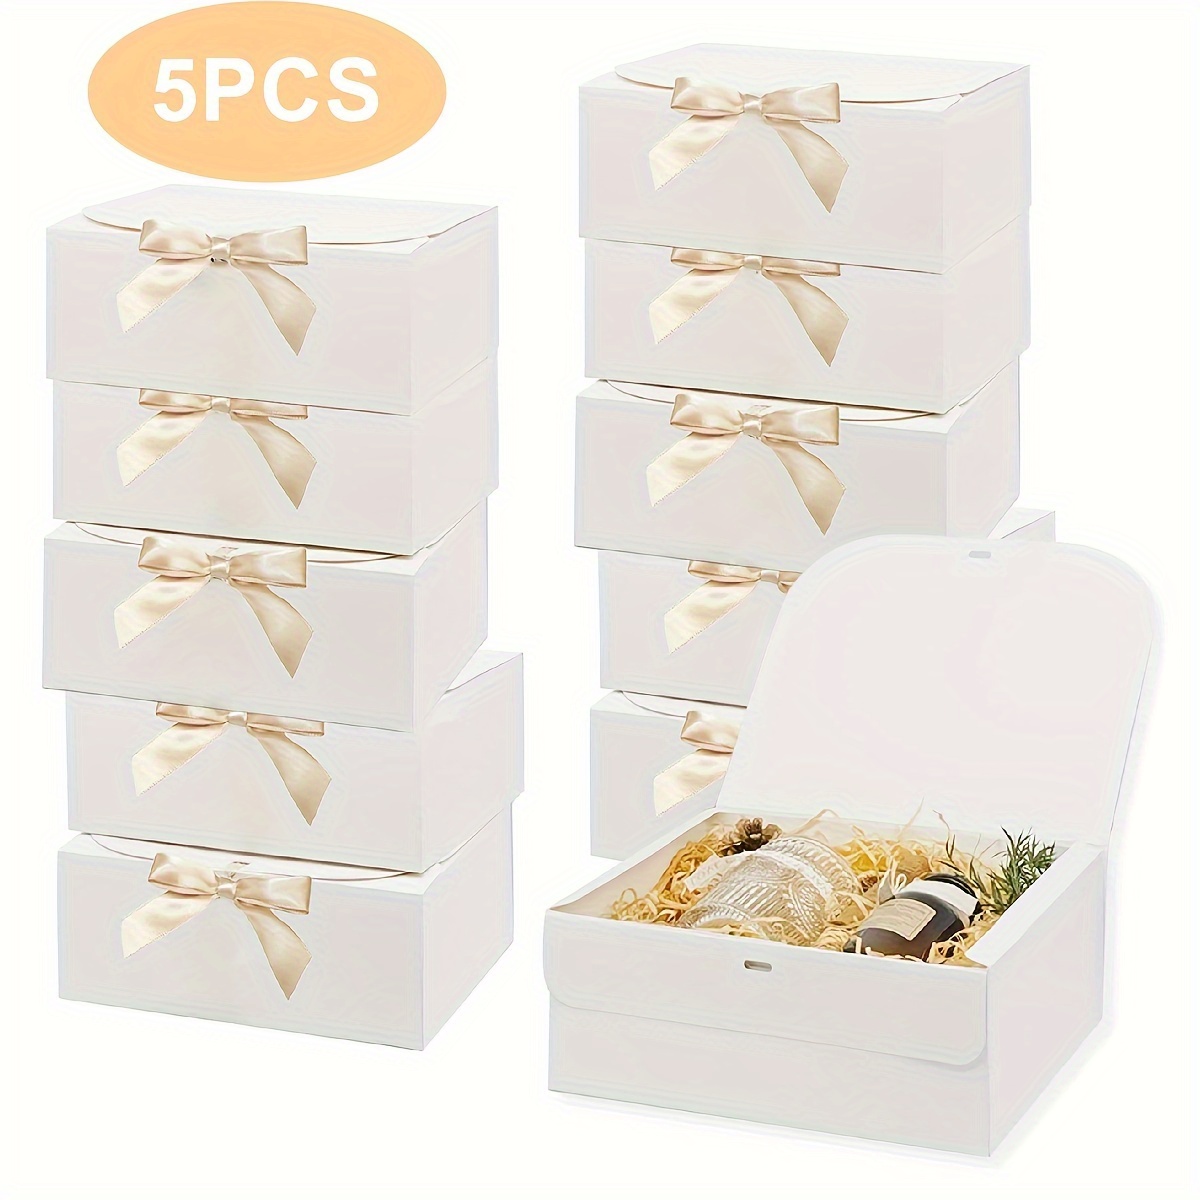 

5pcs Large Ribbon-tied Gift Packaging Boxes - Multipurpose Paper Storage Containers For Jewelry Display, Wedding & Party Favors, Holiday & Birthday Presents, Christmas, Thanksgiving, Halloween Gifts